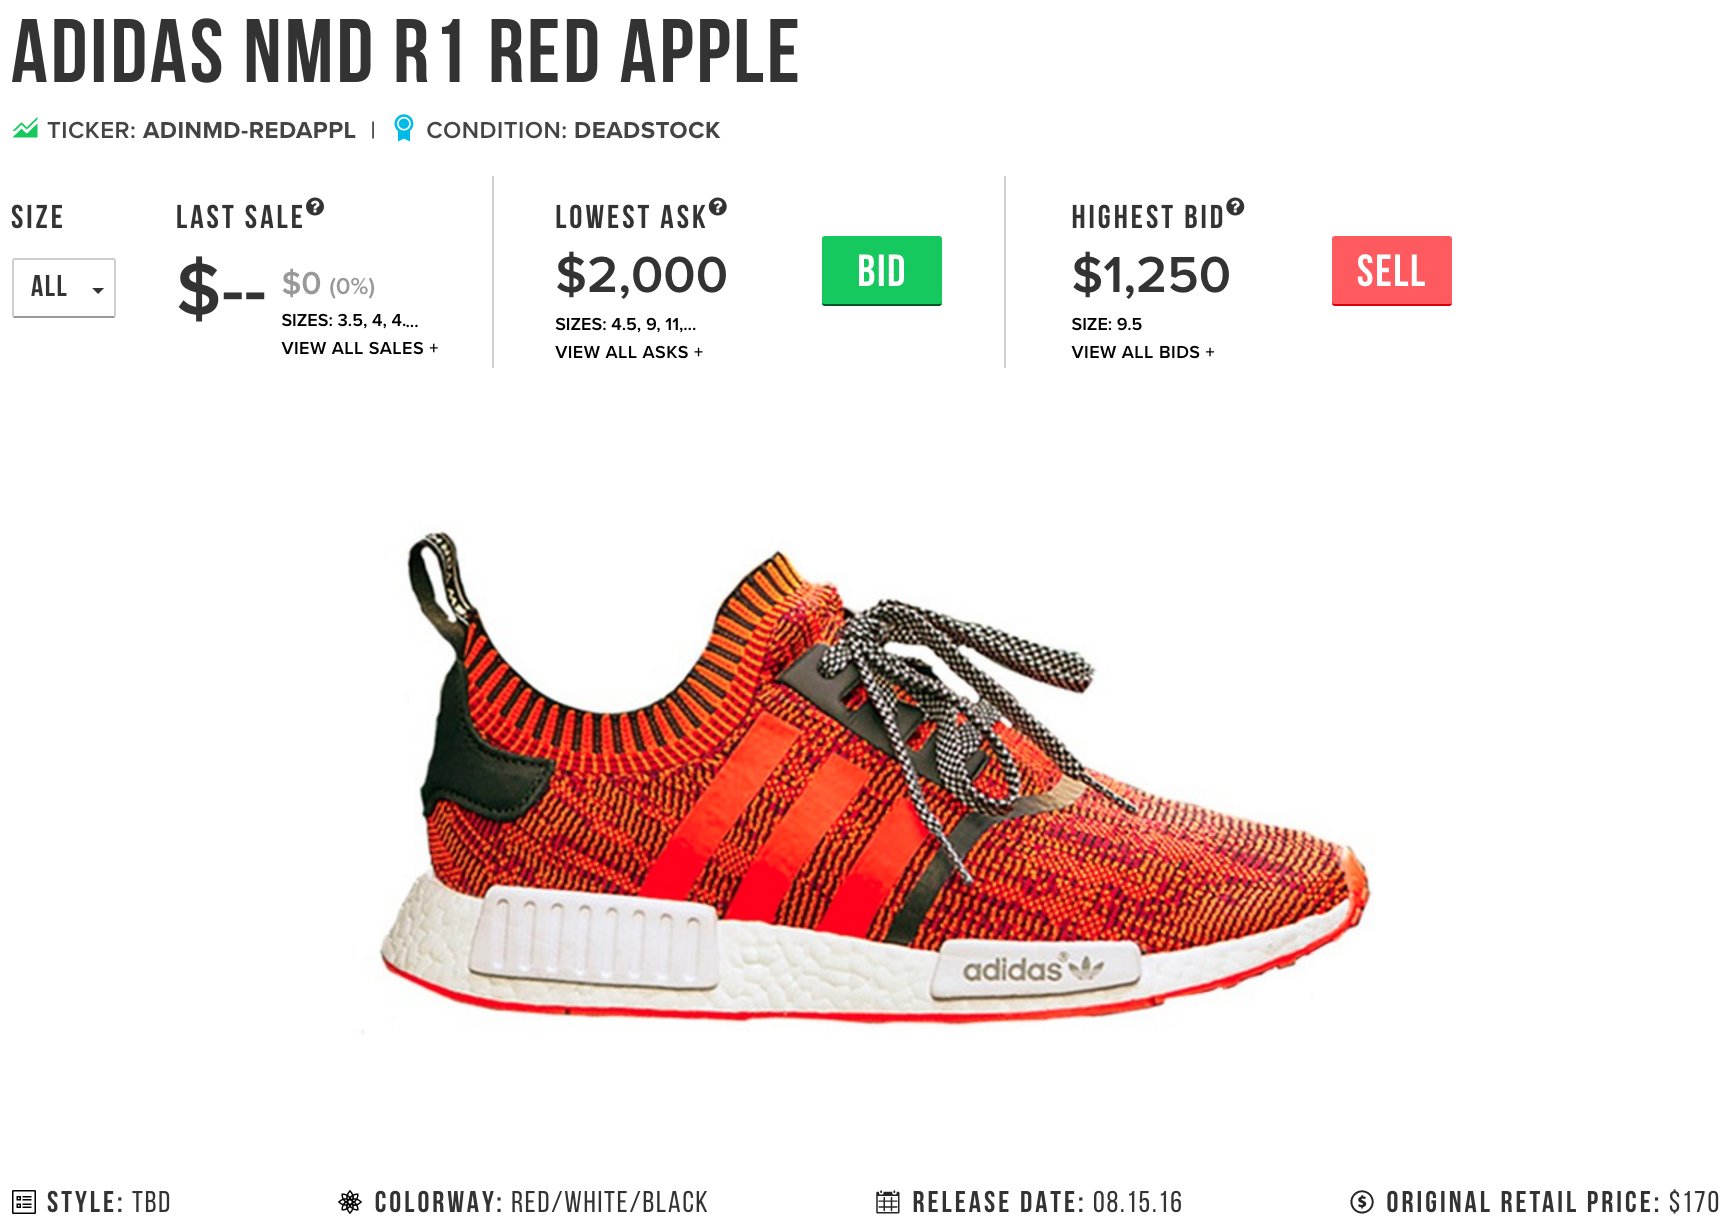 Isla de Alcatraz jefe Engañoso StockX on Twitter: "This is happening with adidas NMD "Red Apple" prices:  https://t.co/QcEta9Ib6H https://t.co/D2RboY9bBk" / Twitter